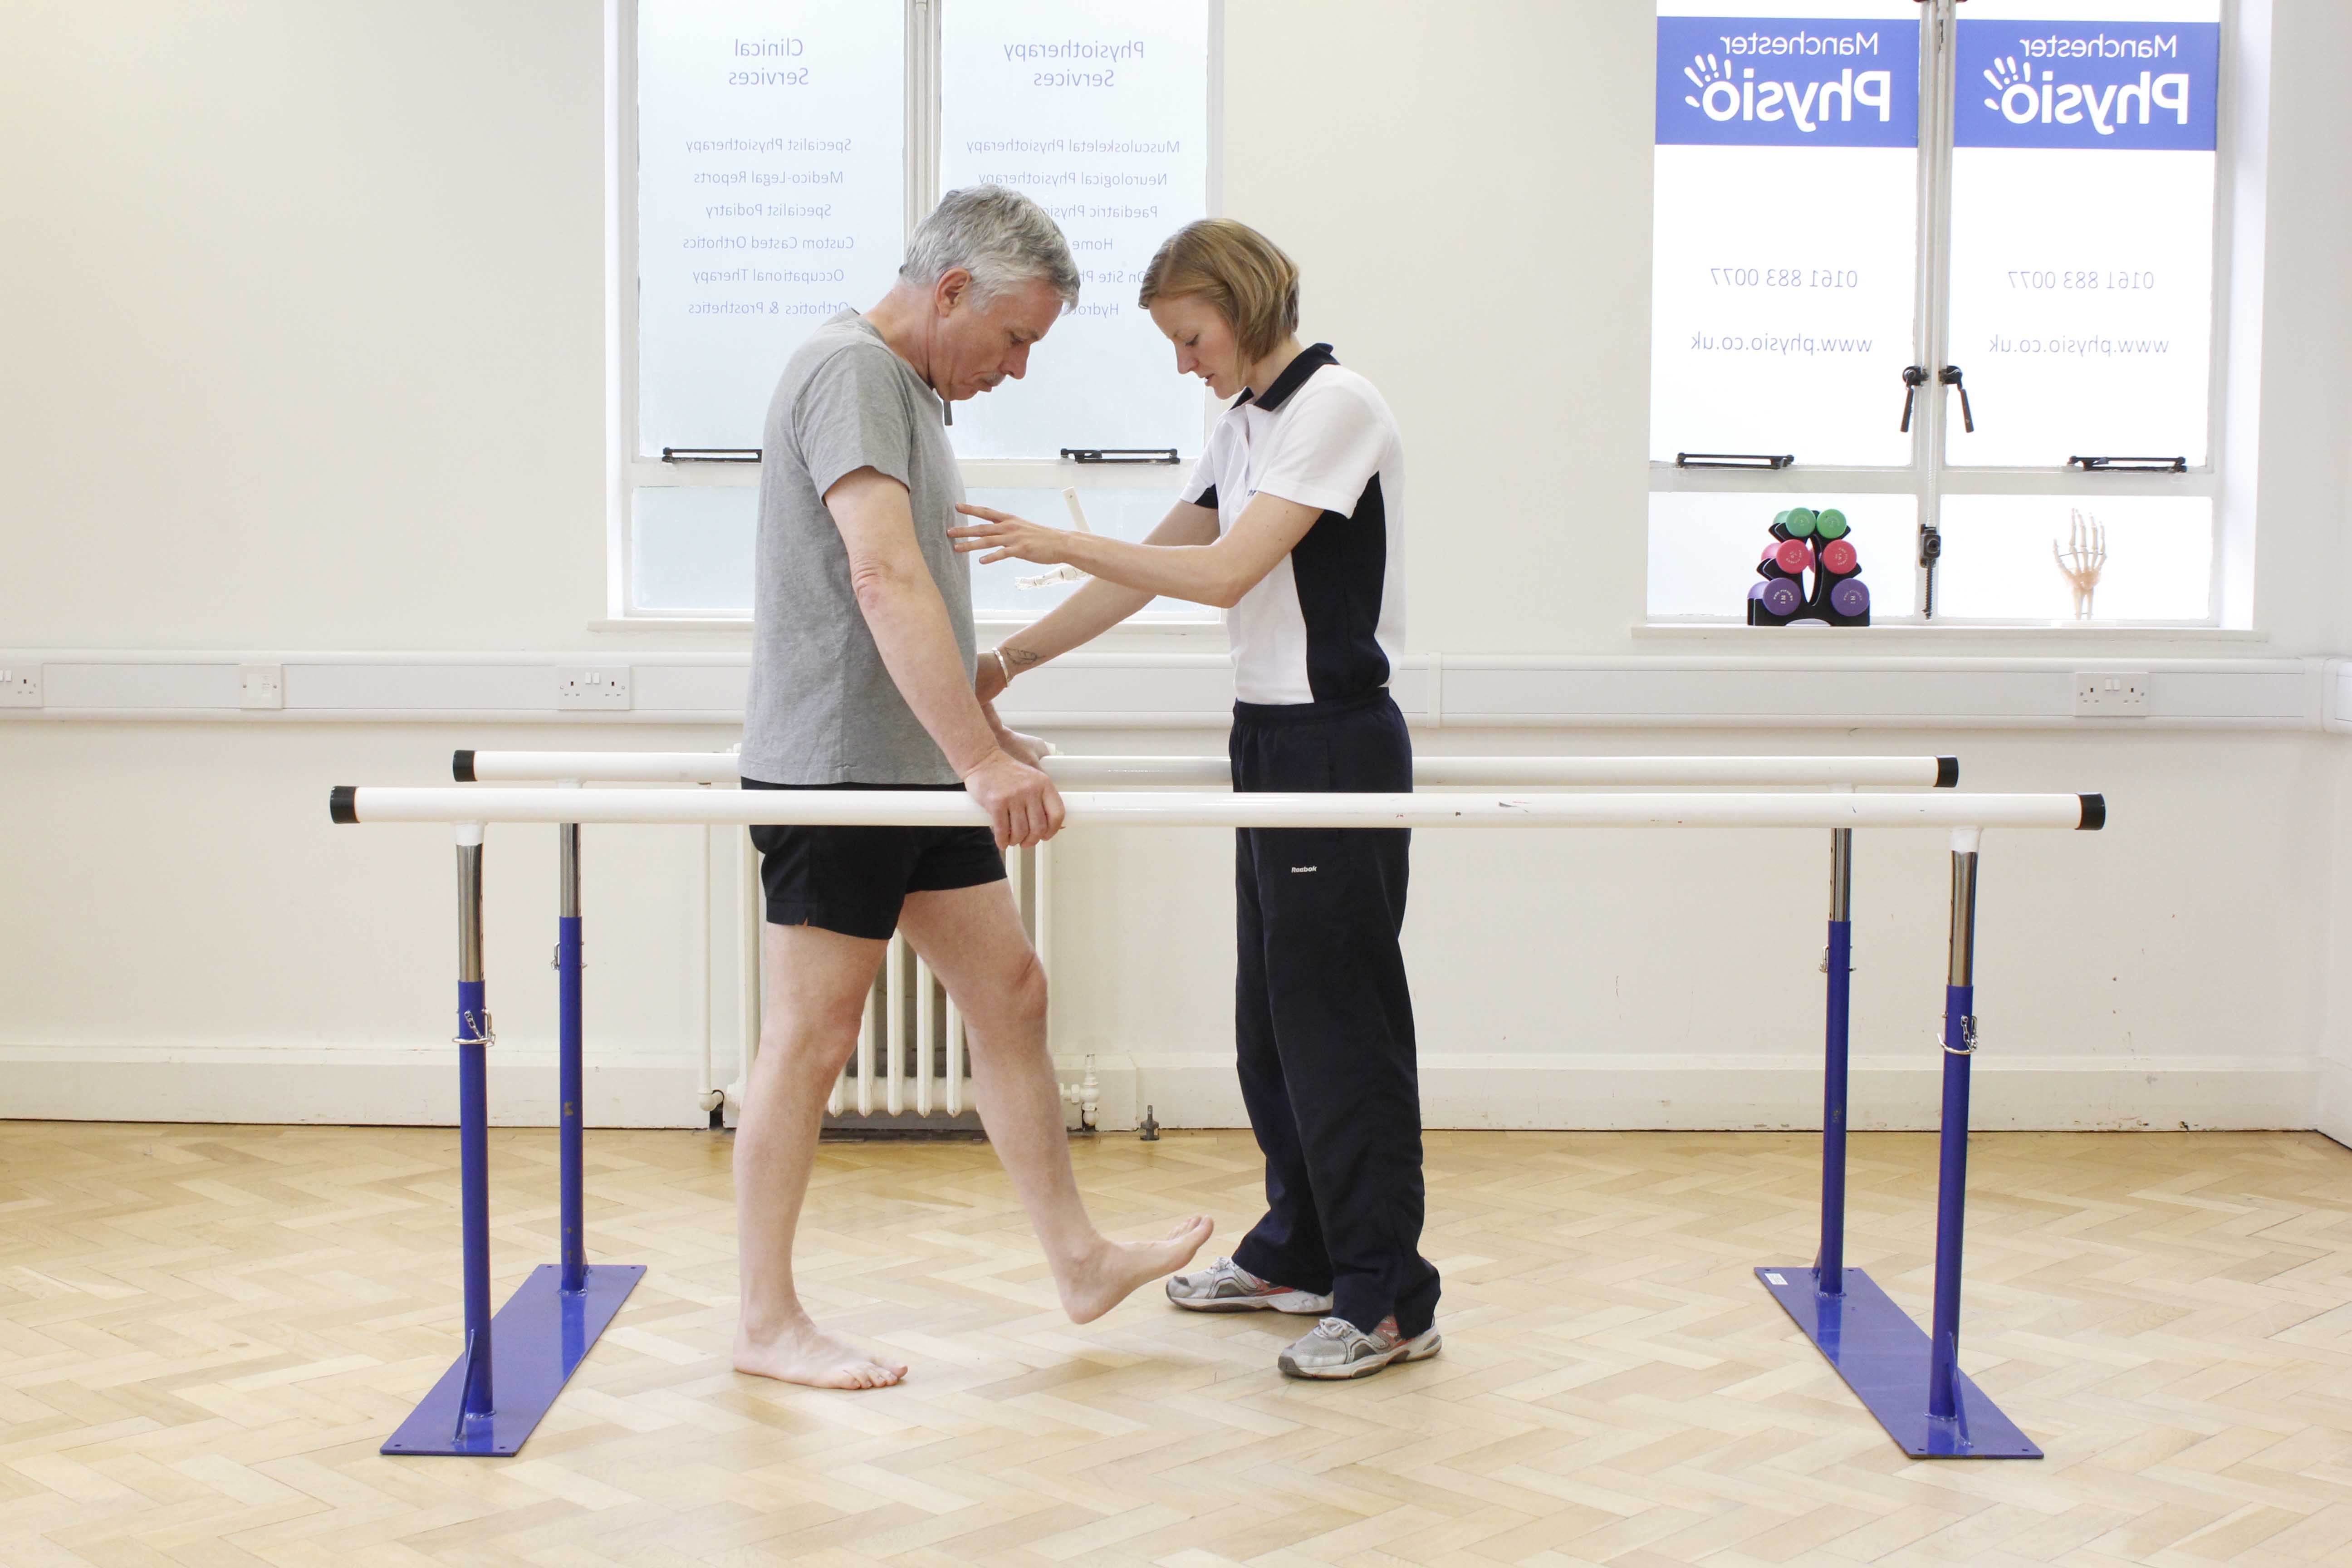 Gait re-education exercises closely supervised by a specialist neurological physiotherapist